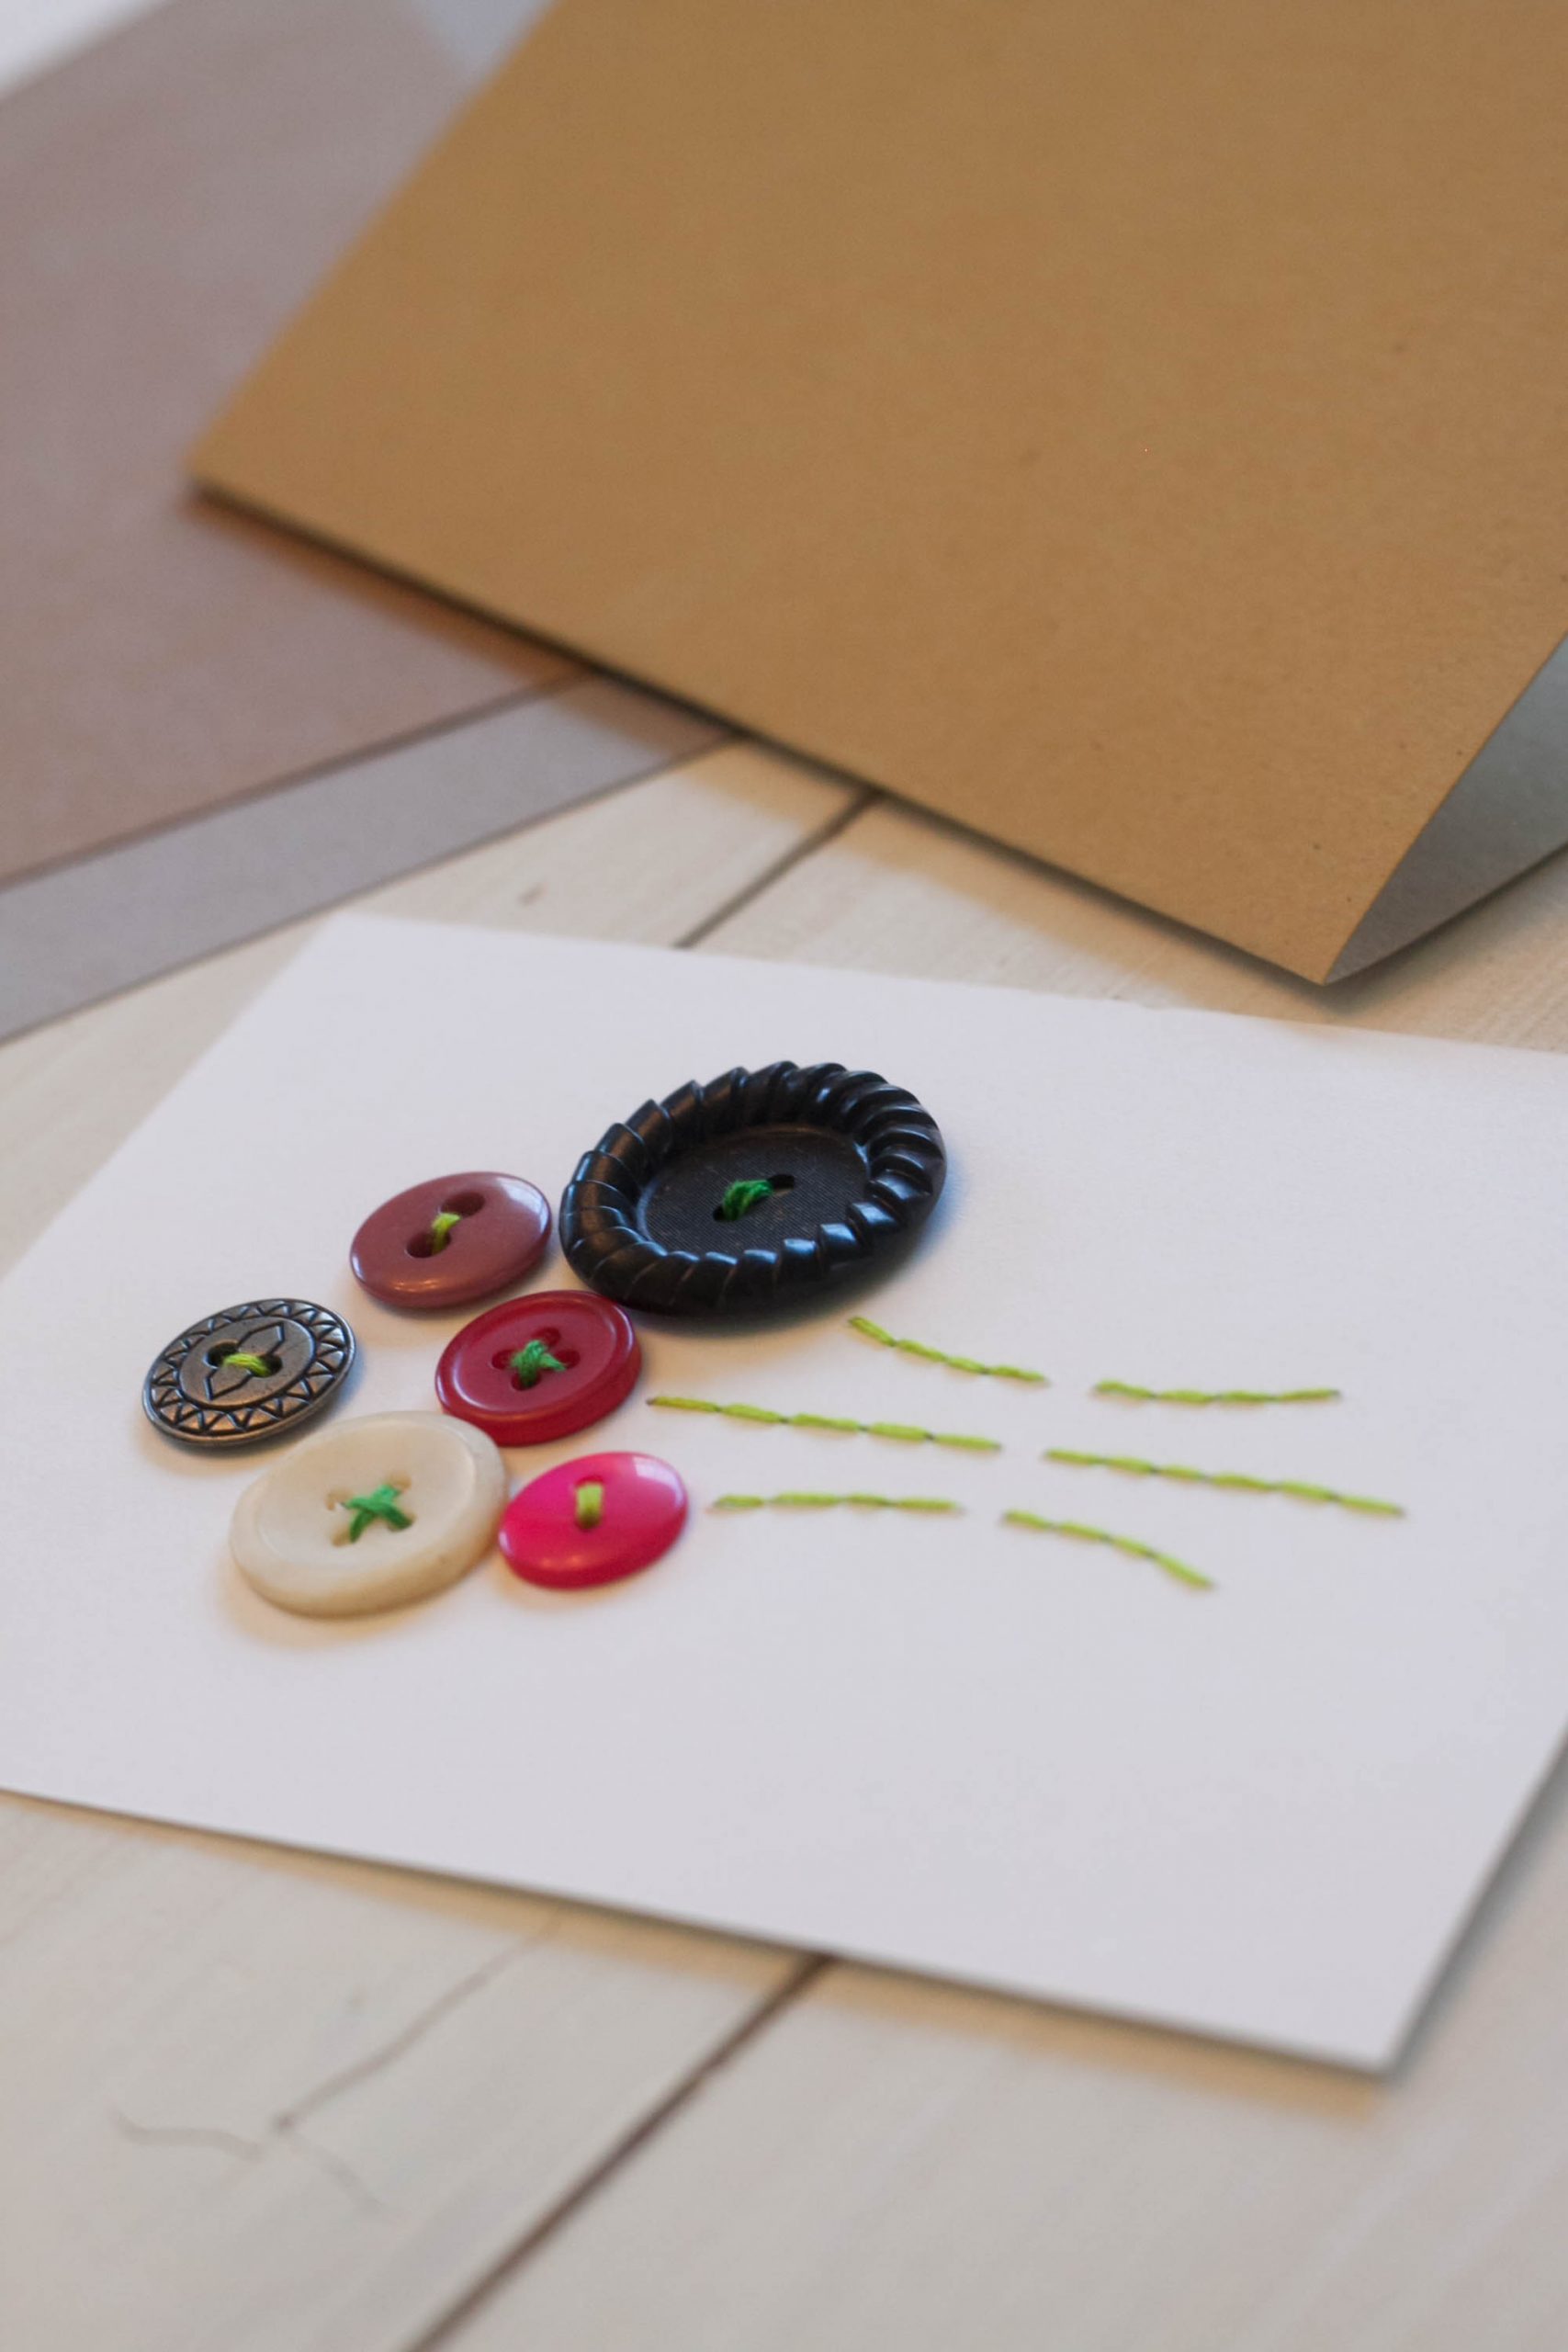 This DIY Button Embroidery Cards tutorial is so easy, and the simple embroidery pattern is seriously perfect for a beginner emboider-er.